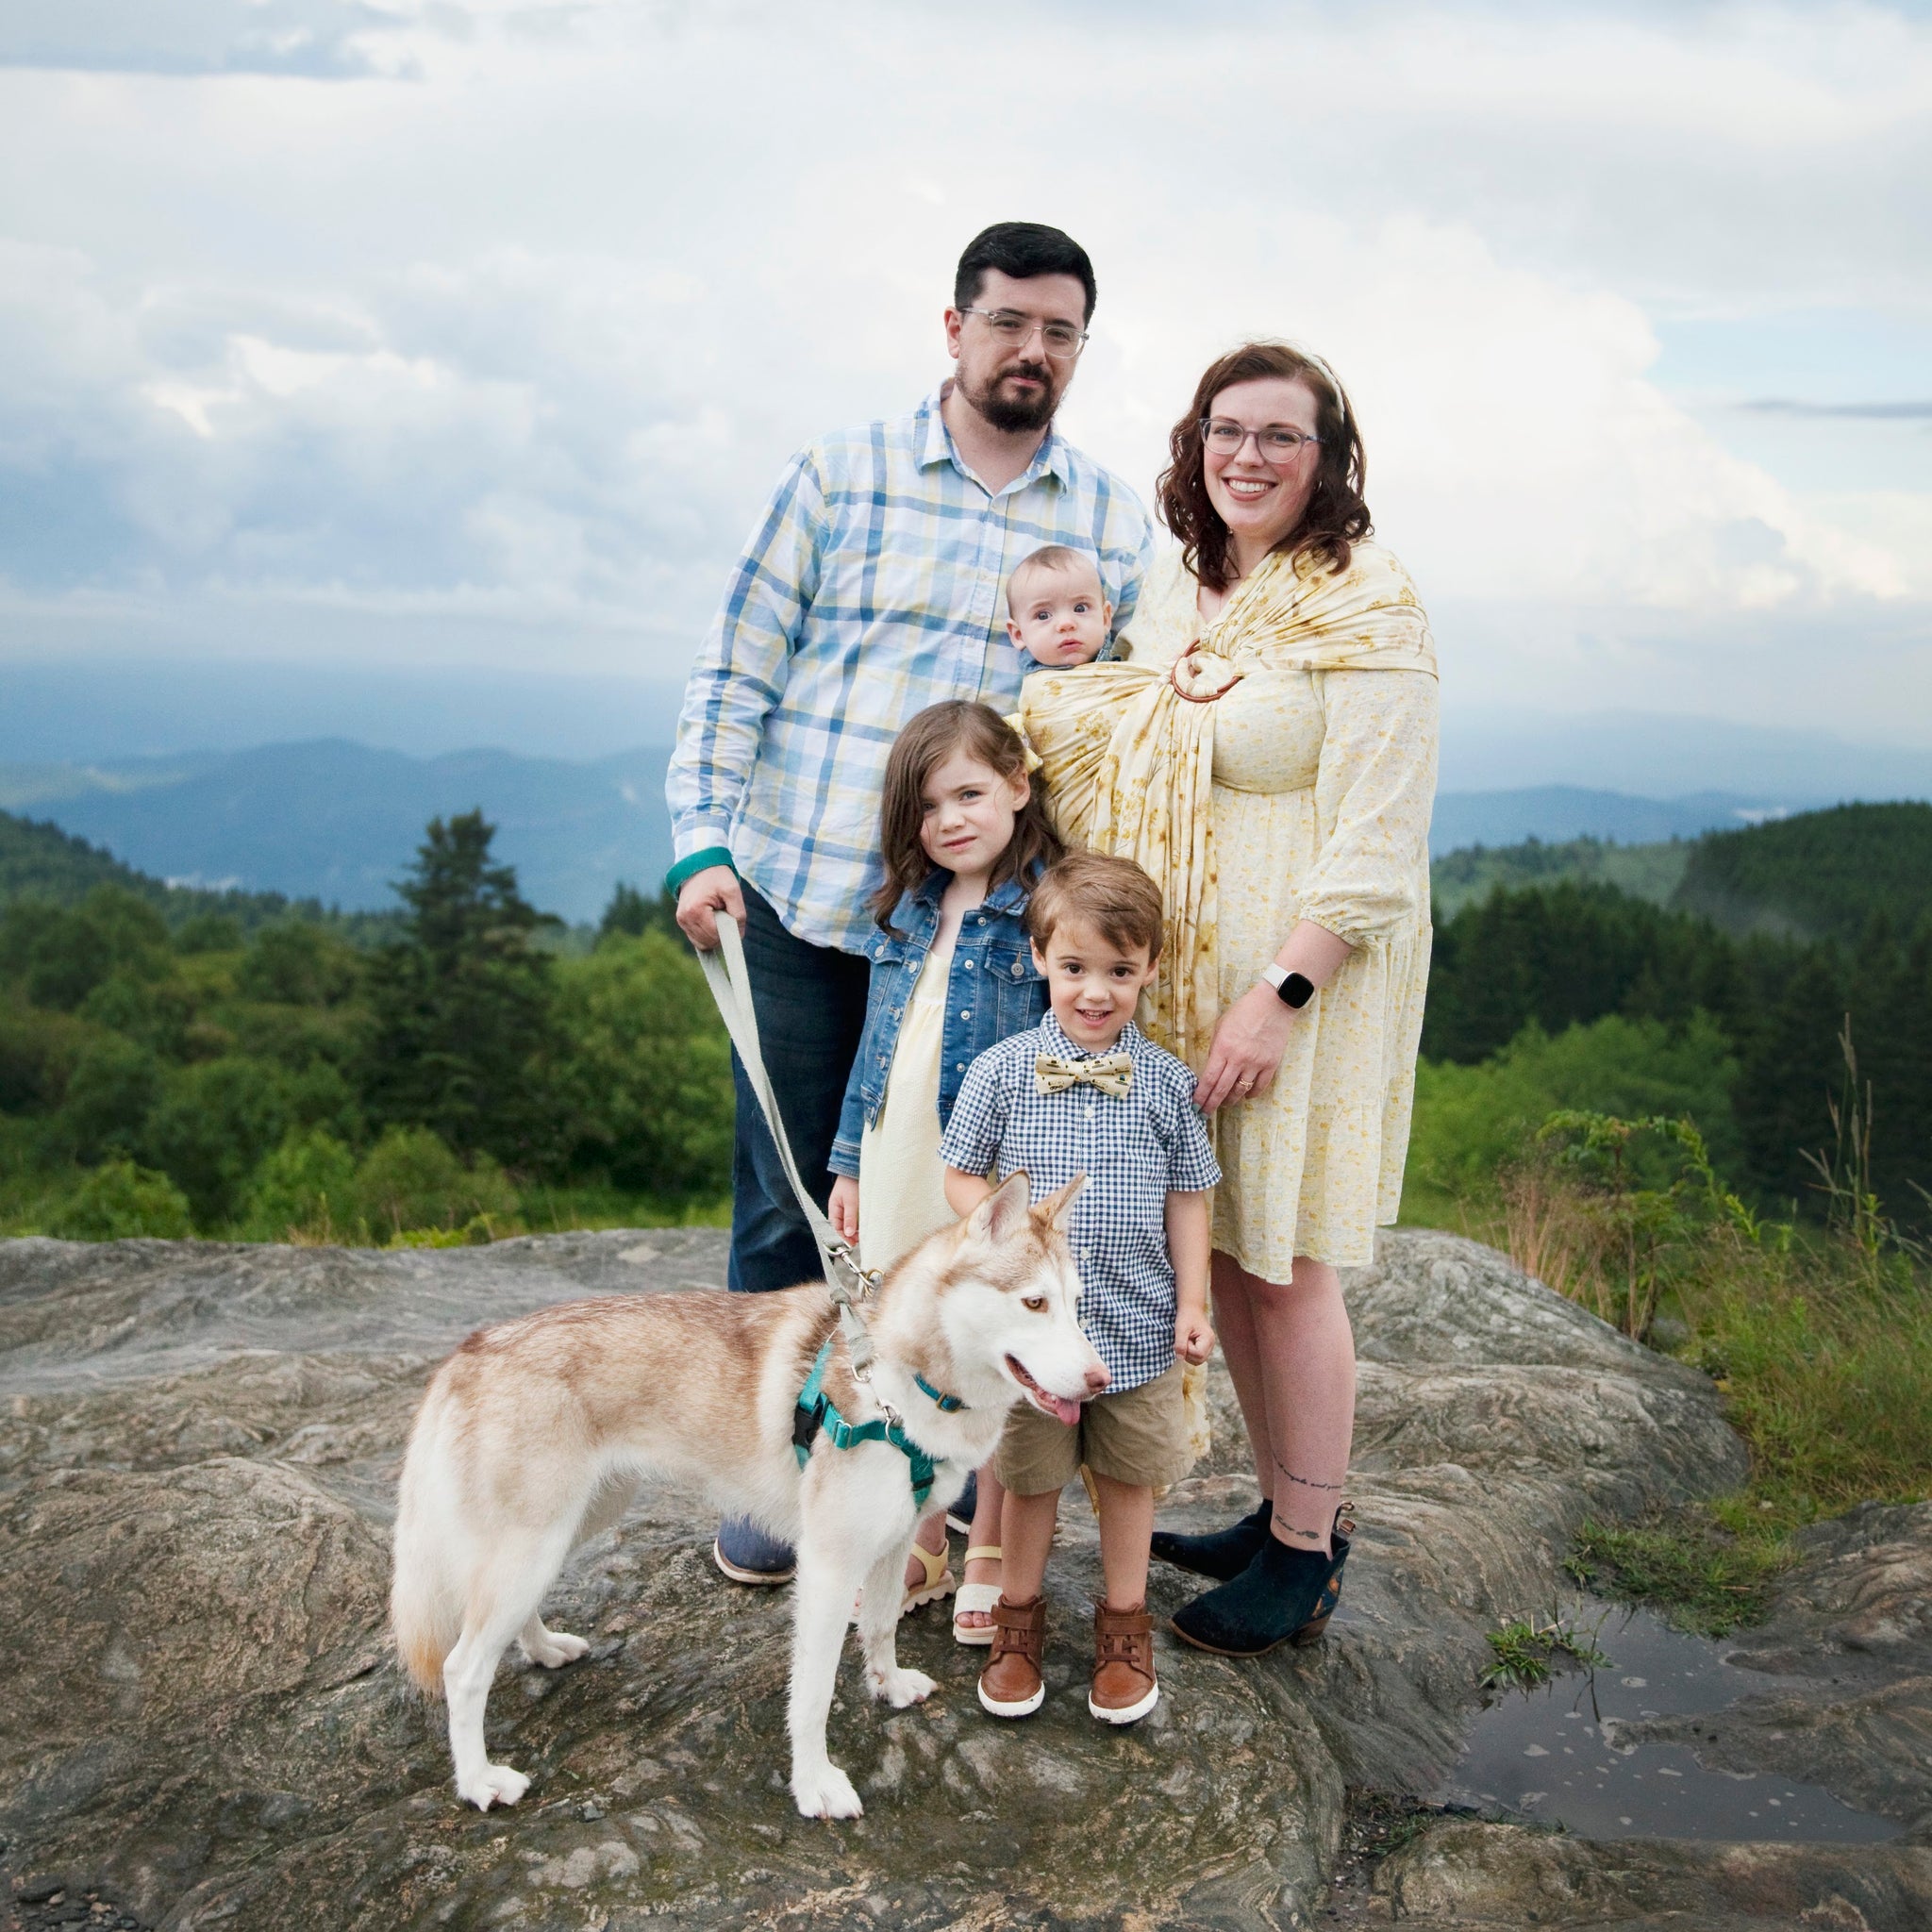 A man, woman, two children, and a baby standing on a mountaintop with their dog. The woman is Ivy Doe & Co owner Riley with her family.